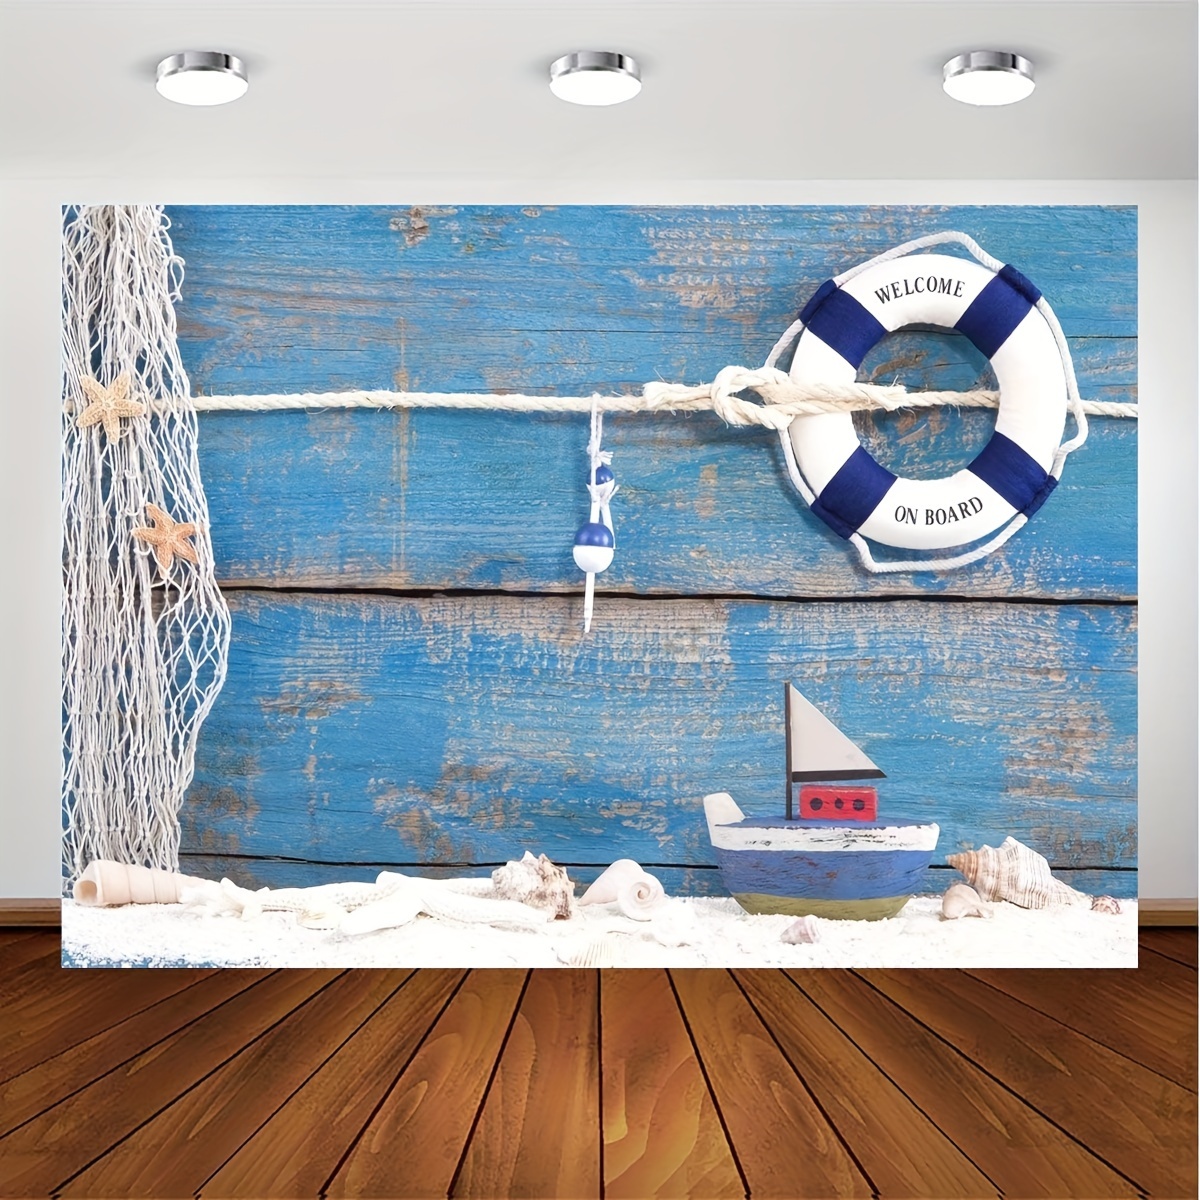 Buoy Tote Bag, Welcome On Board Message On Lifebuoy with Fishing Net Seashell Wood Floor of Boat, Cloth Linen Reusable Bag for Shopping Books Beach